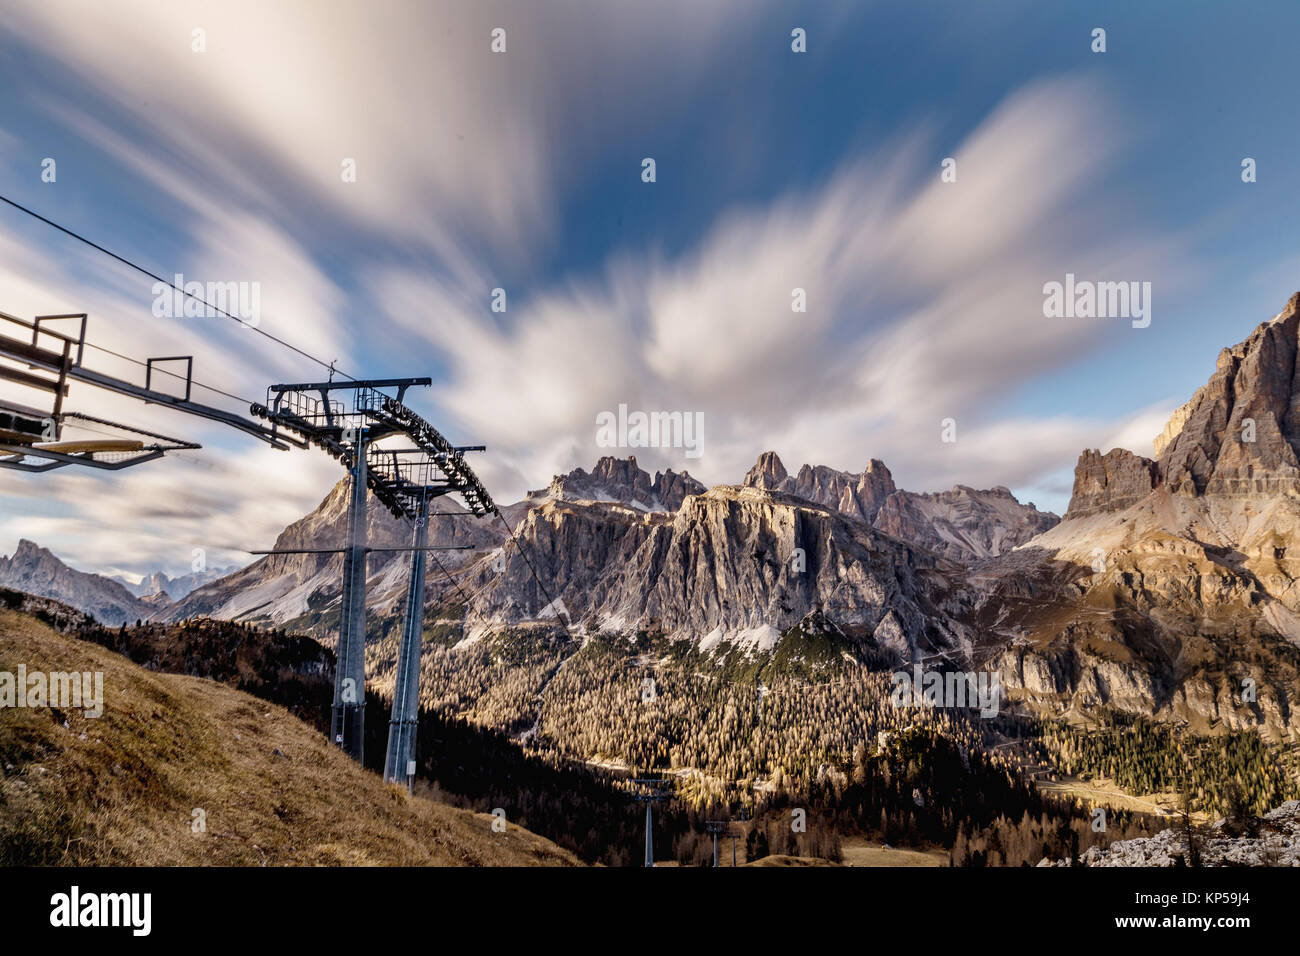 Upper station of the cable car, in the background Dolomites and clouds in motion. Dolomites Alps, Italy, Stock Photo